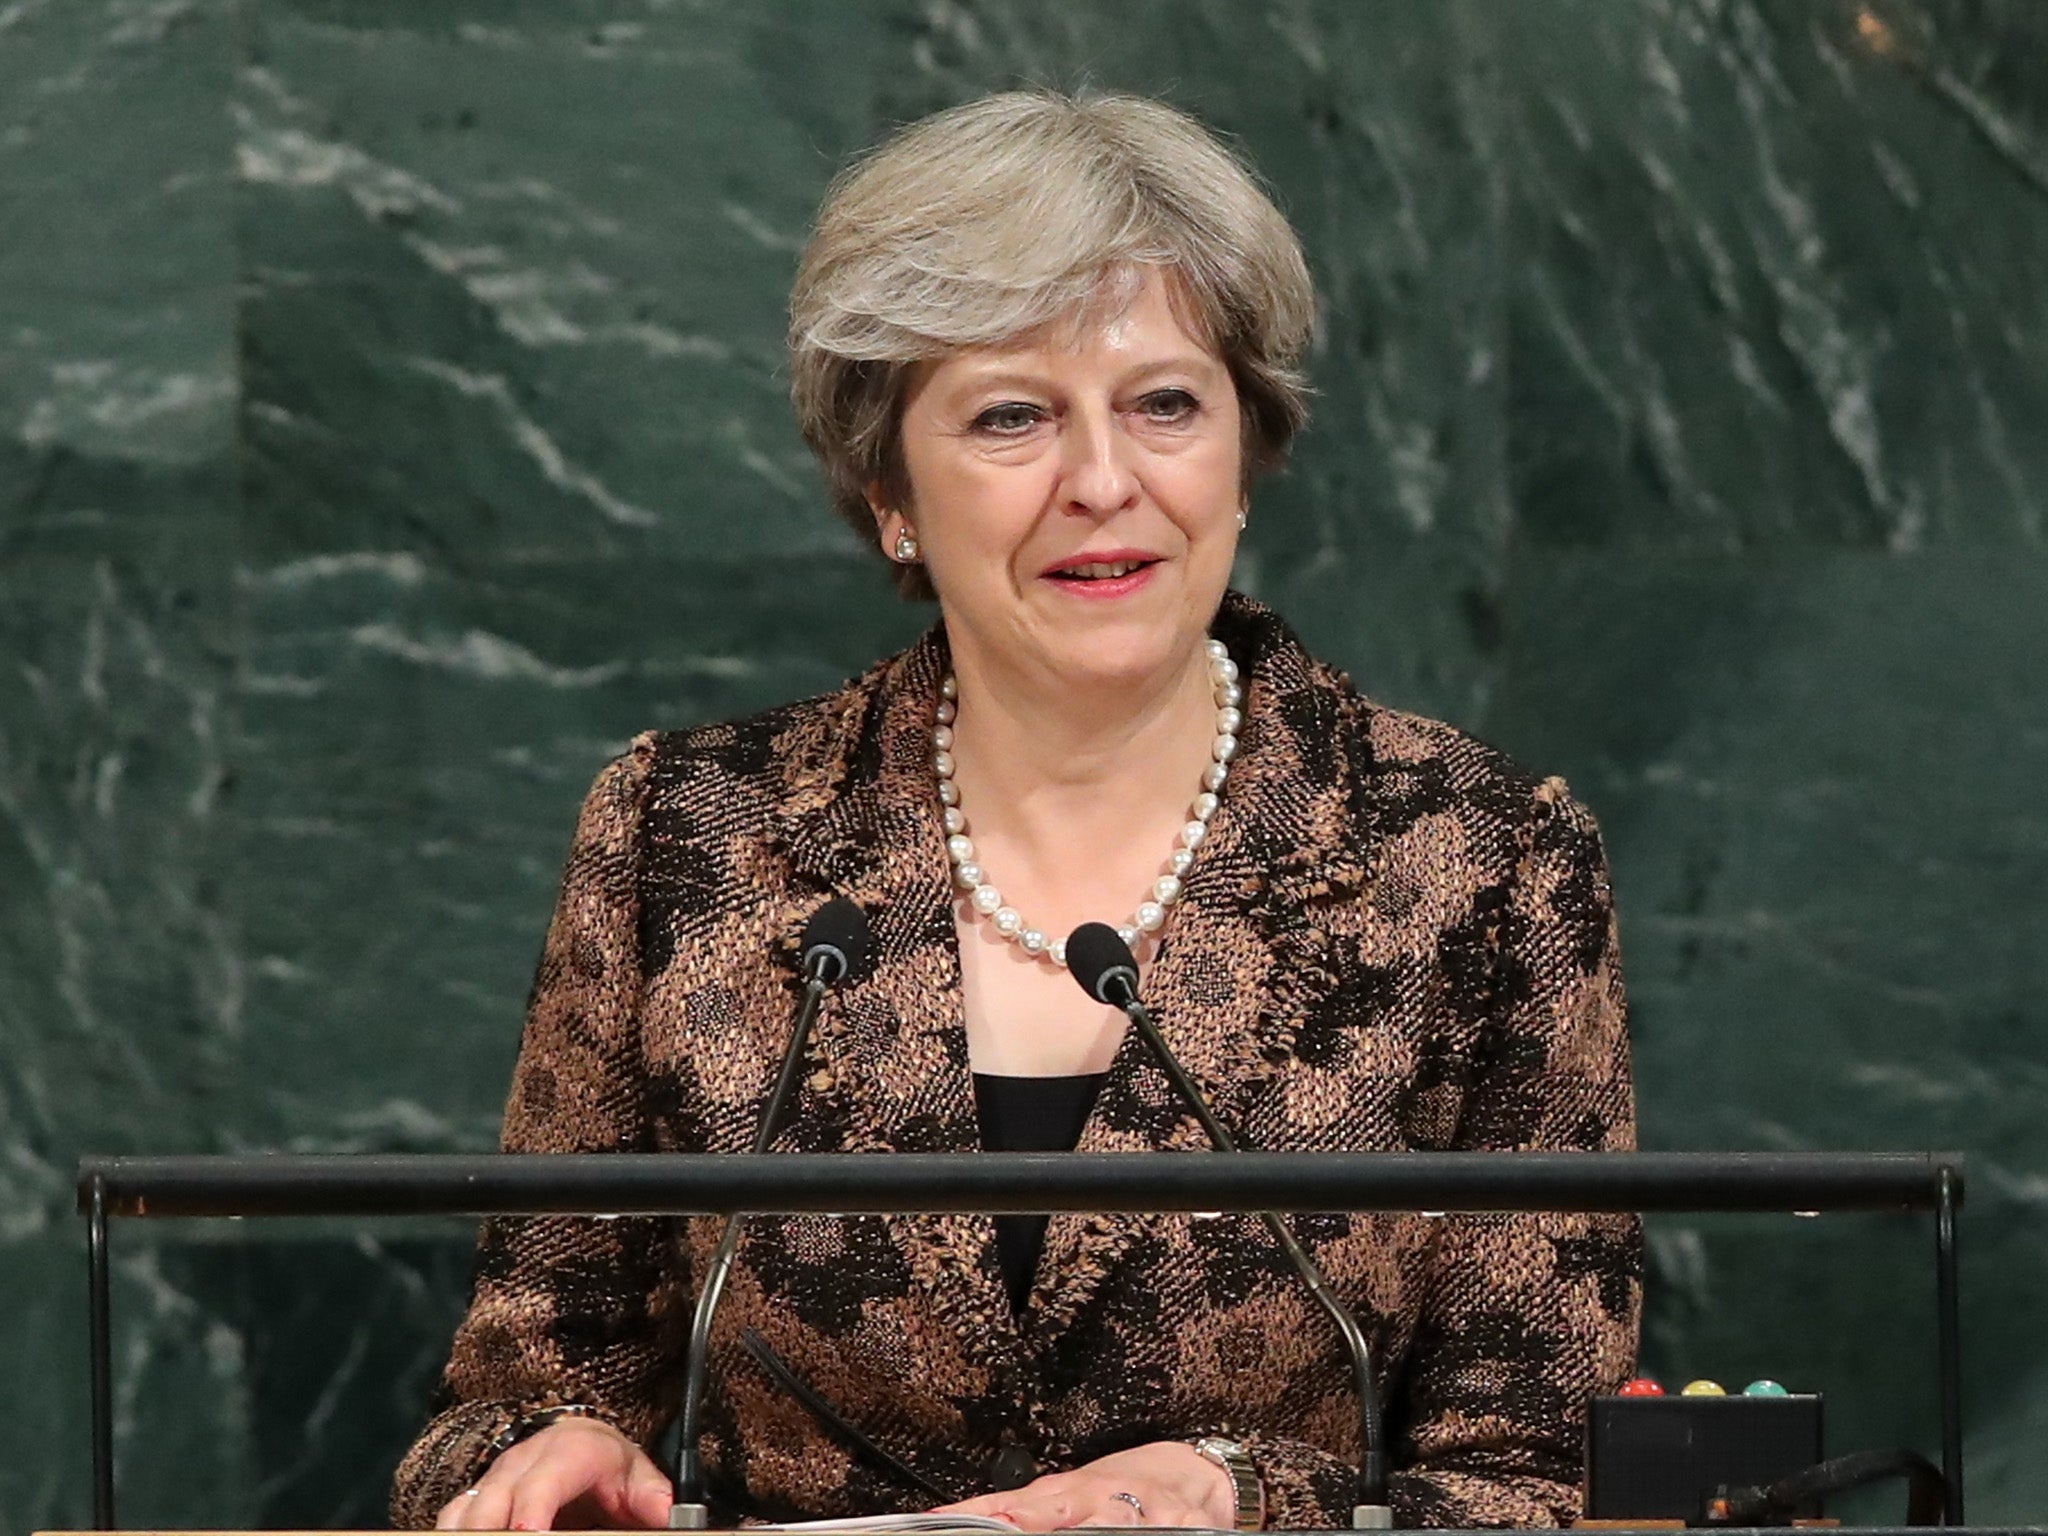 It has come to light that no EU officials will be attending Theresa May’s Florence speech